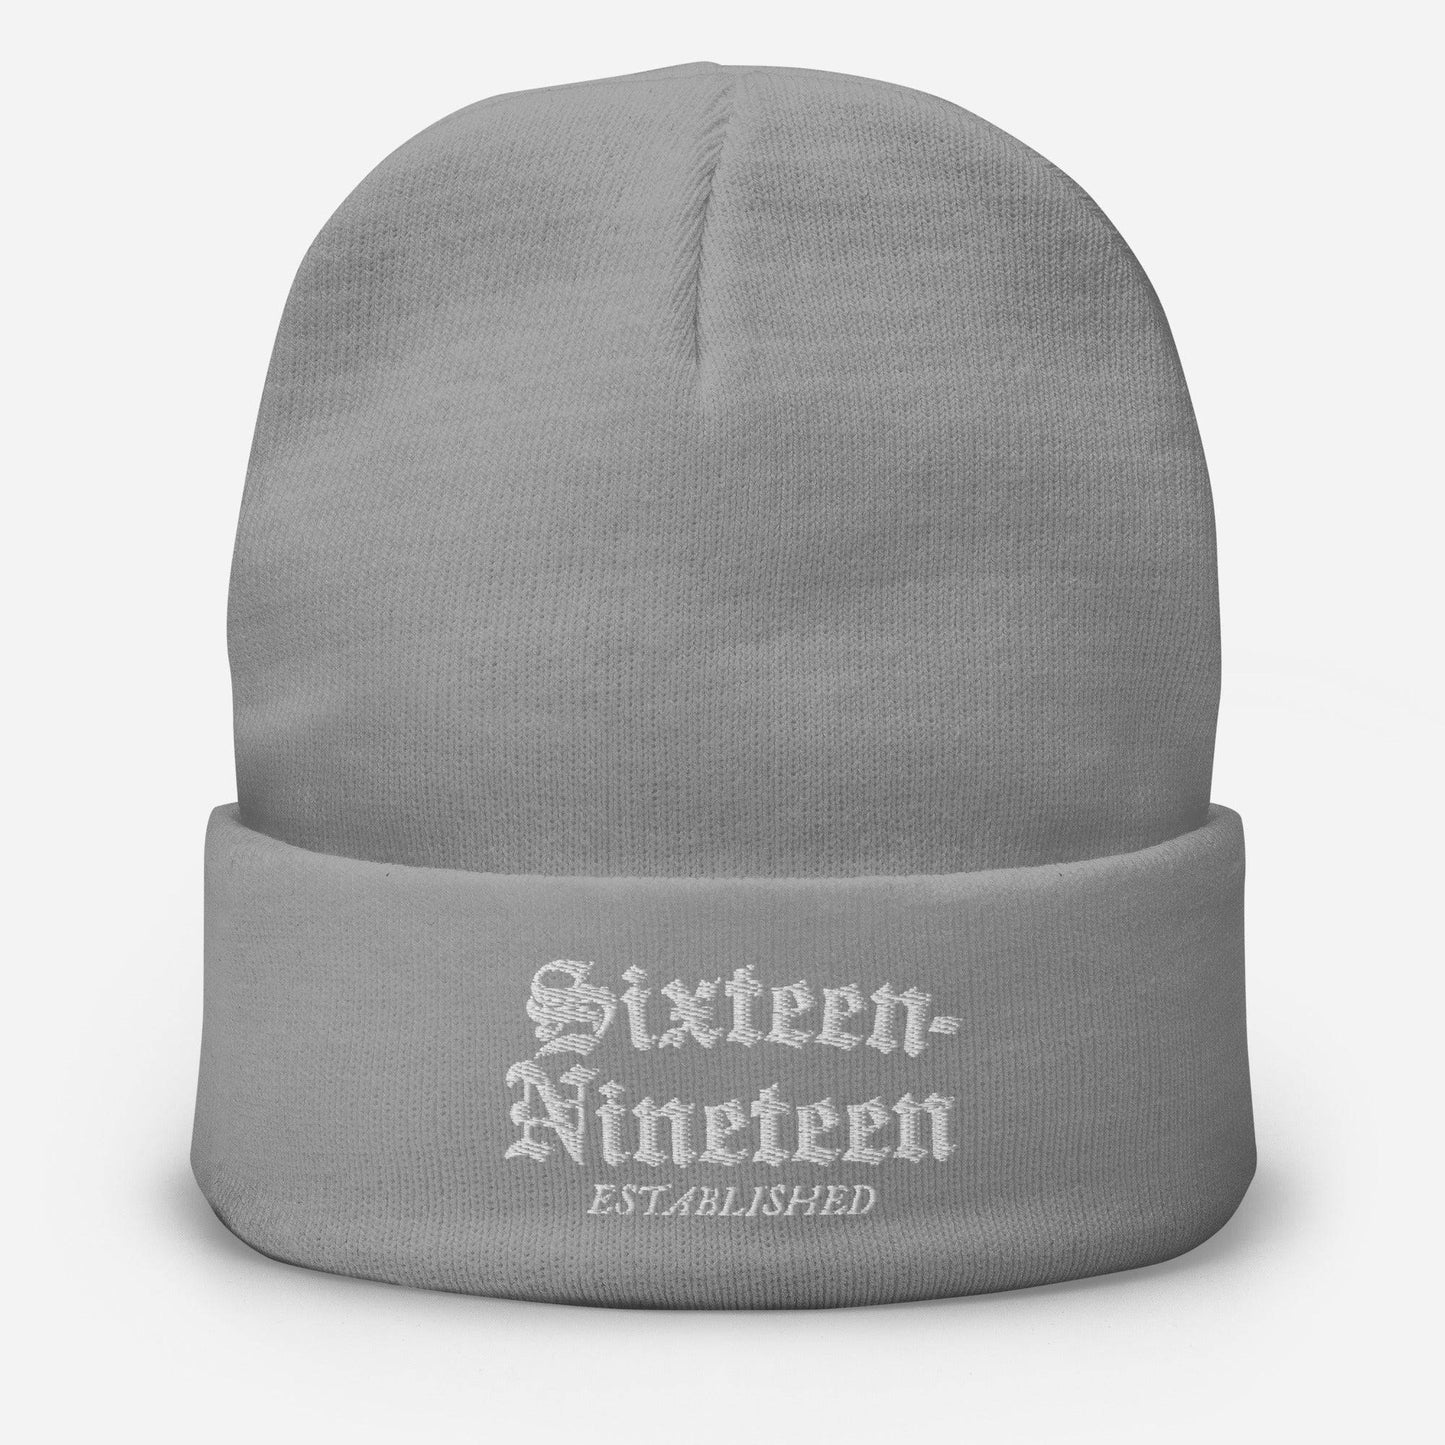 Sixteen-Nineteen Established Embroidered Beanie